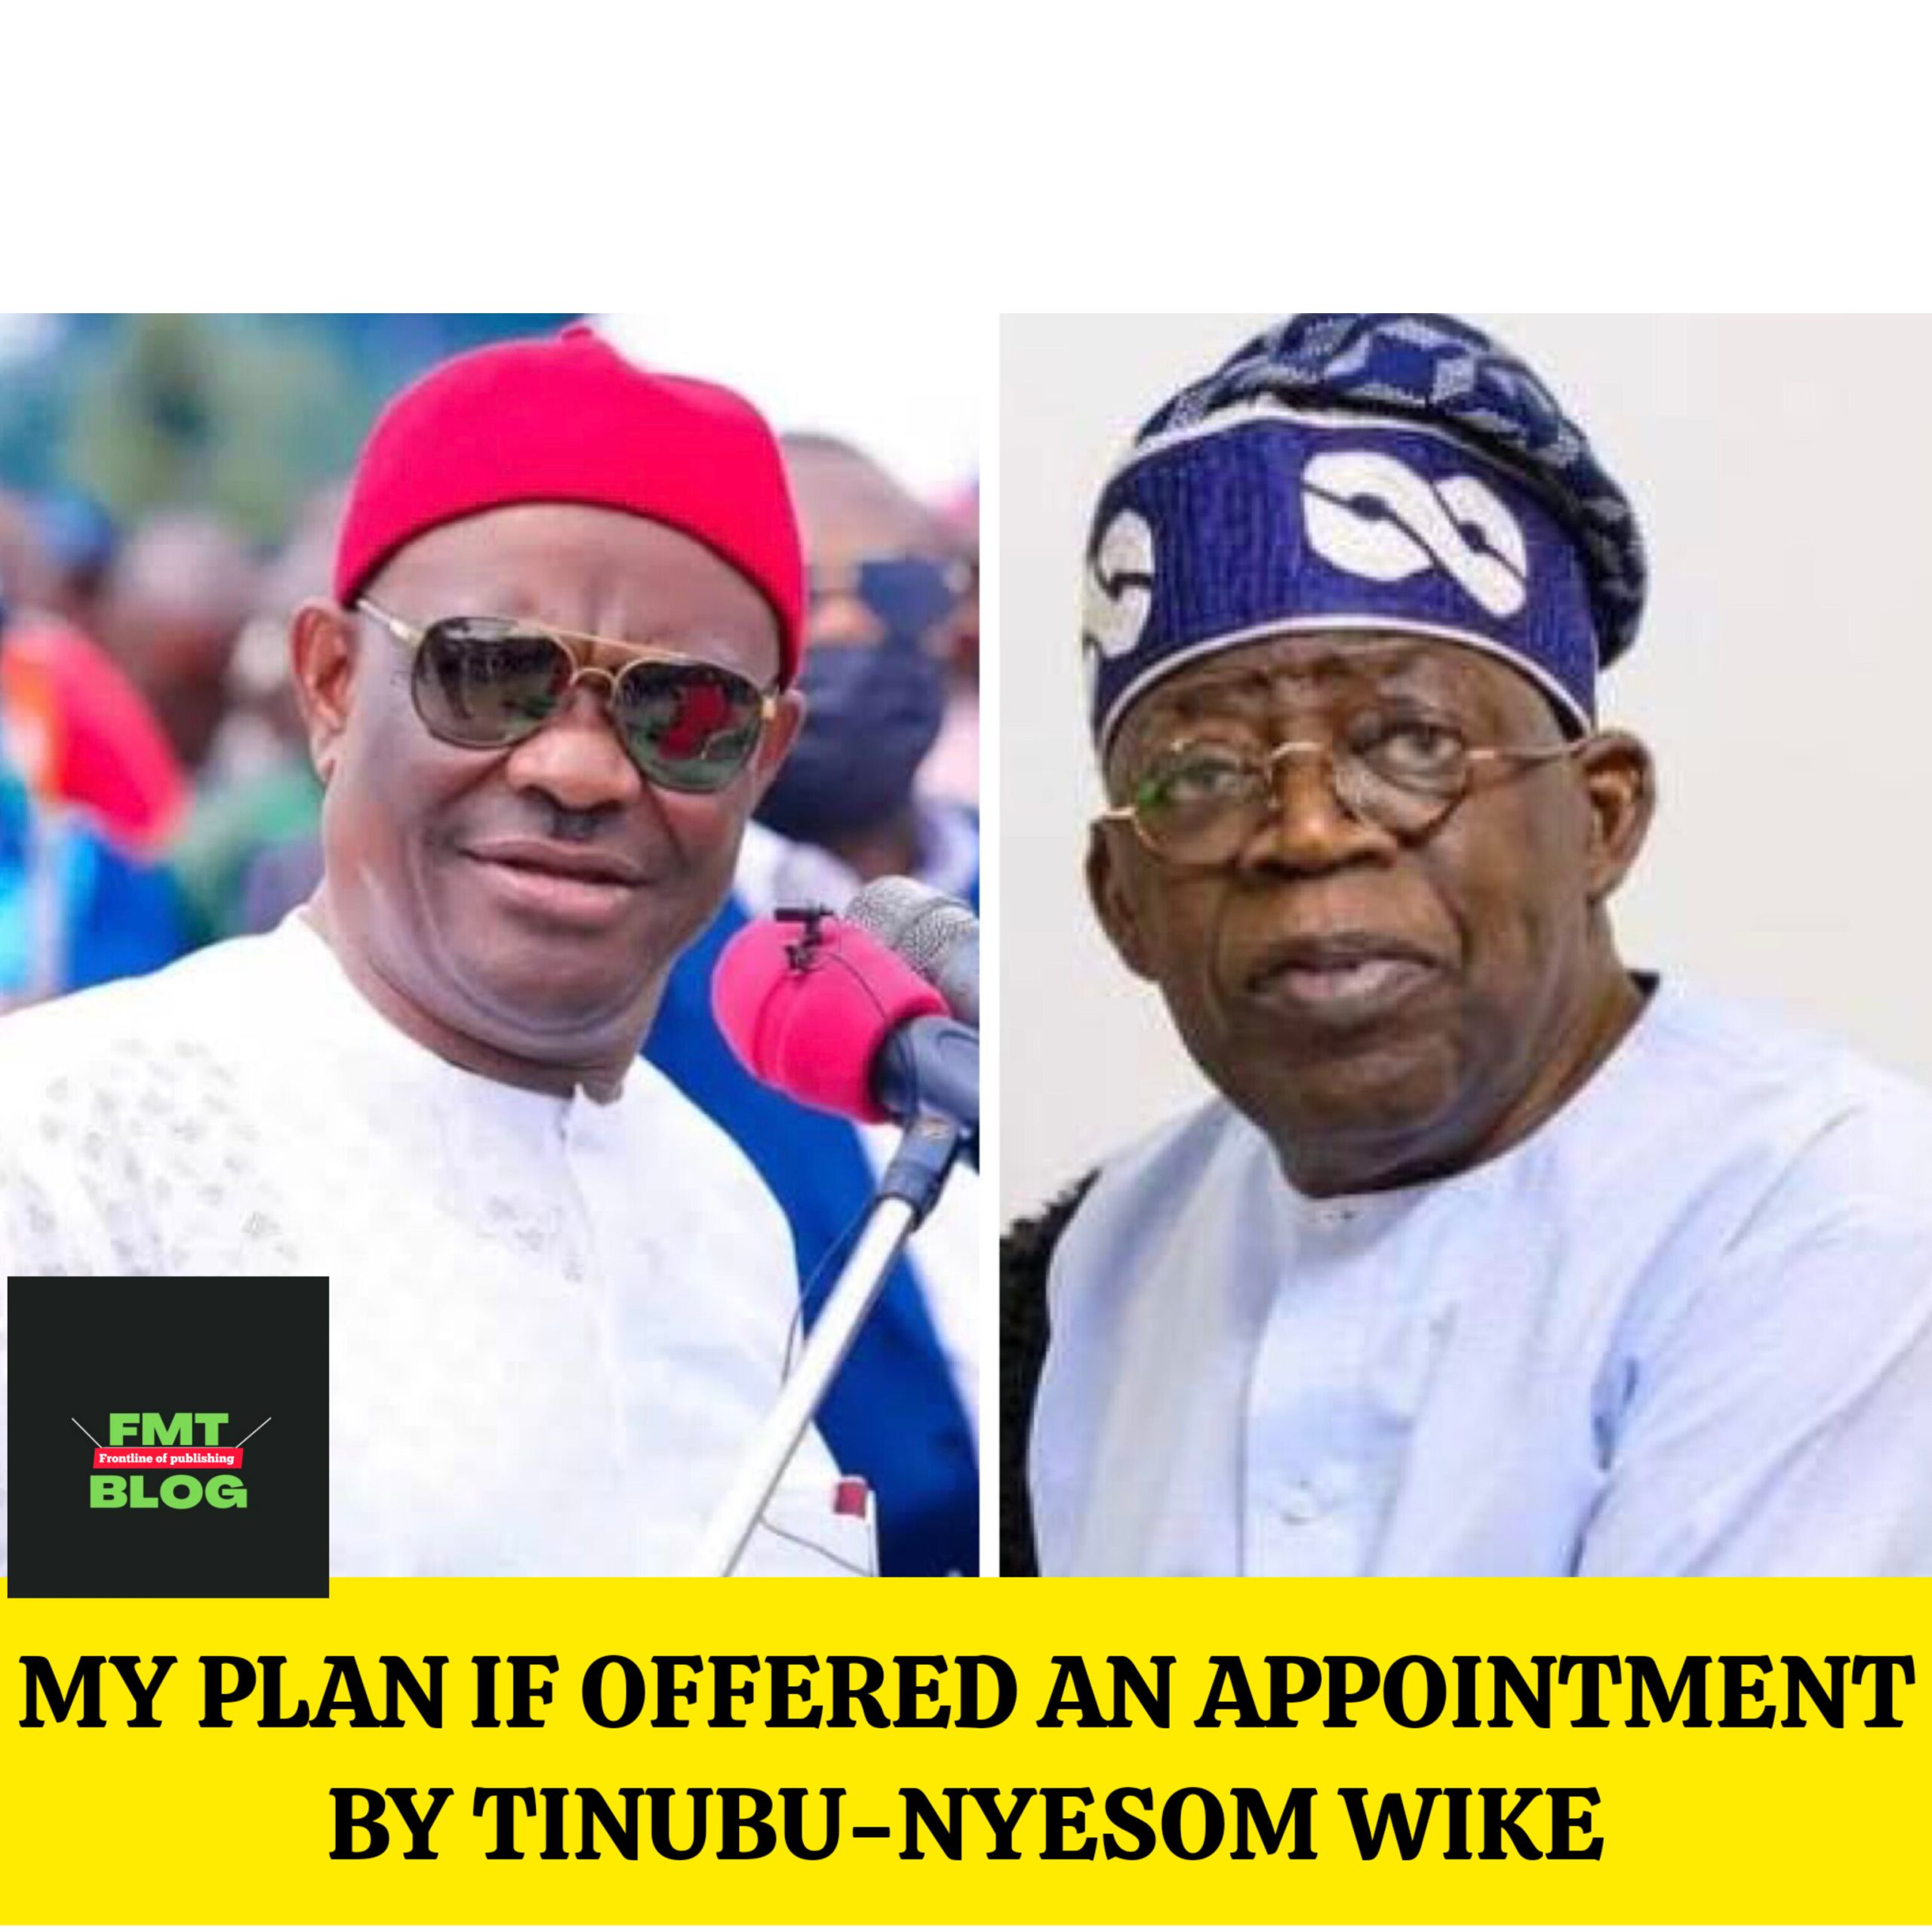 My Plan If offered an appointment by Tinubu- Nyesom Wike